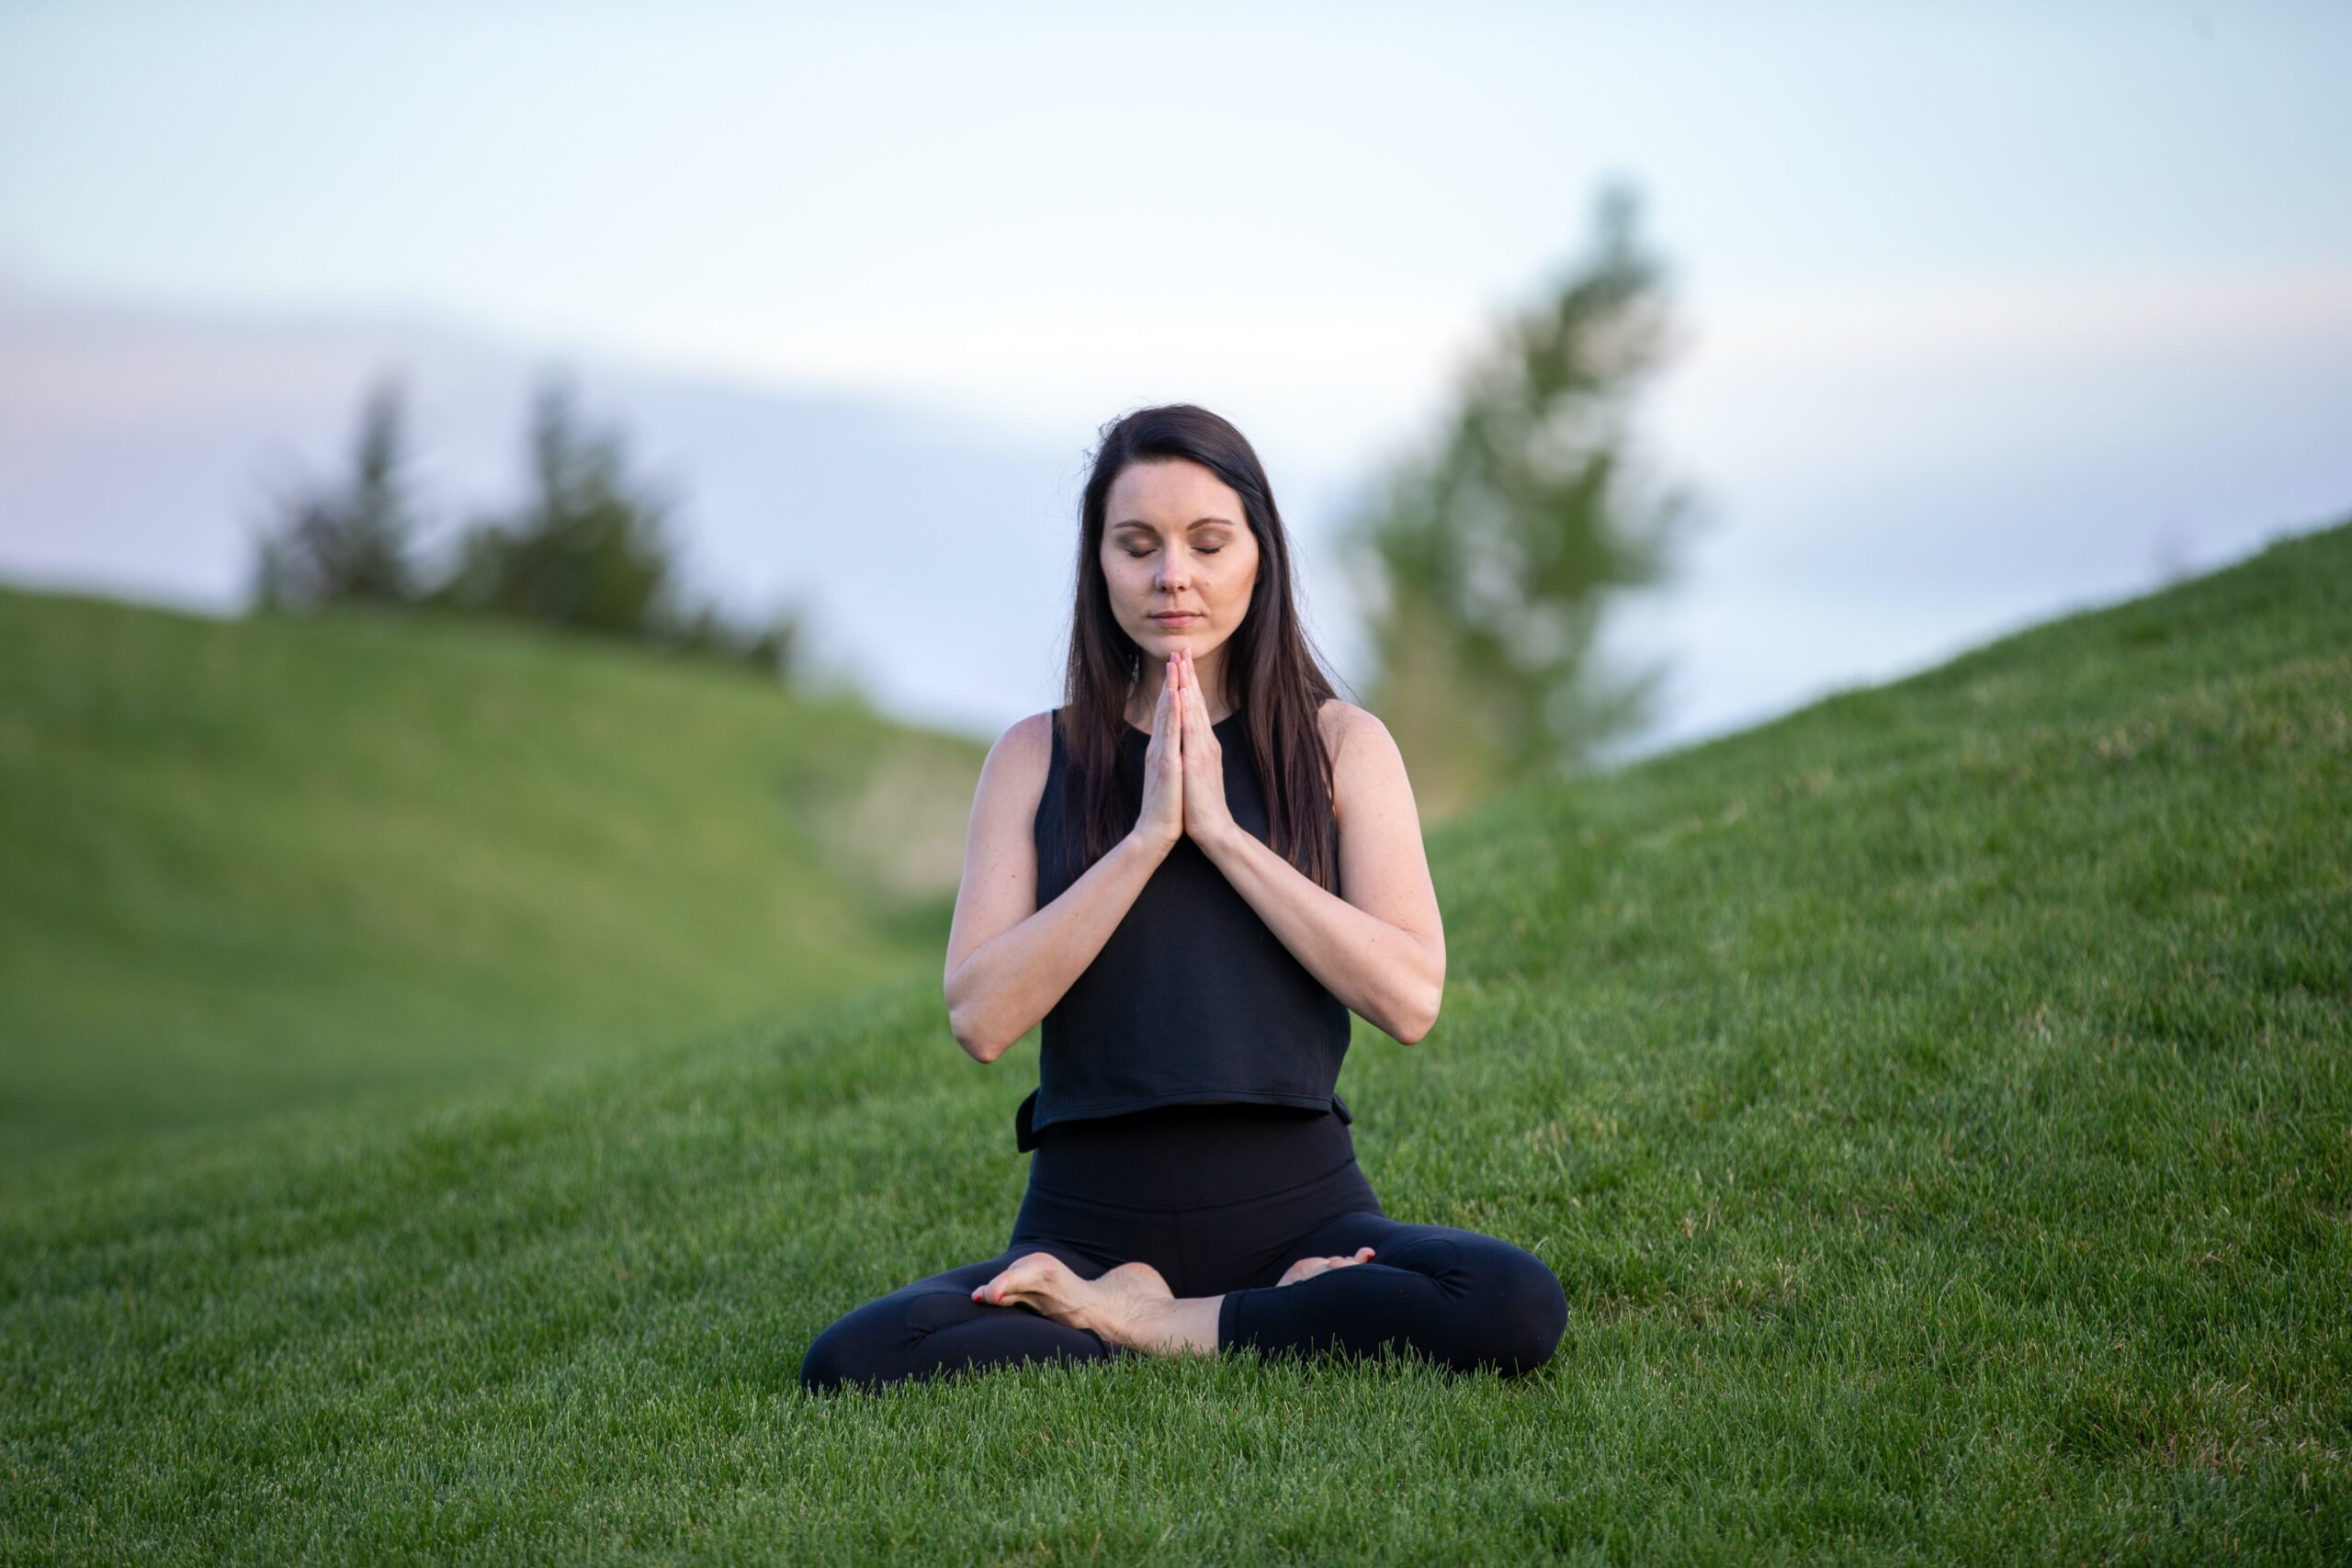 Practicing mindfulness can help reduce stress and anxiety